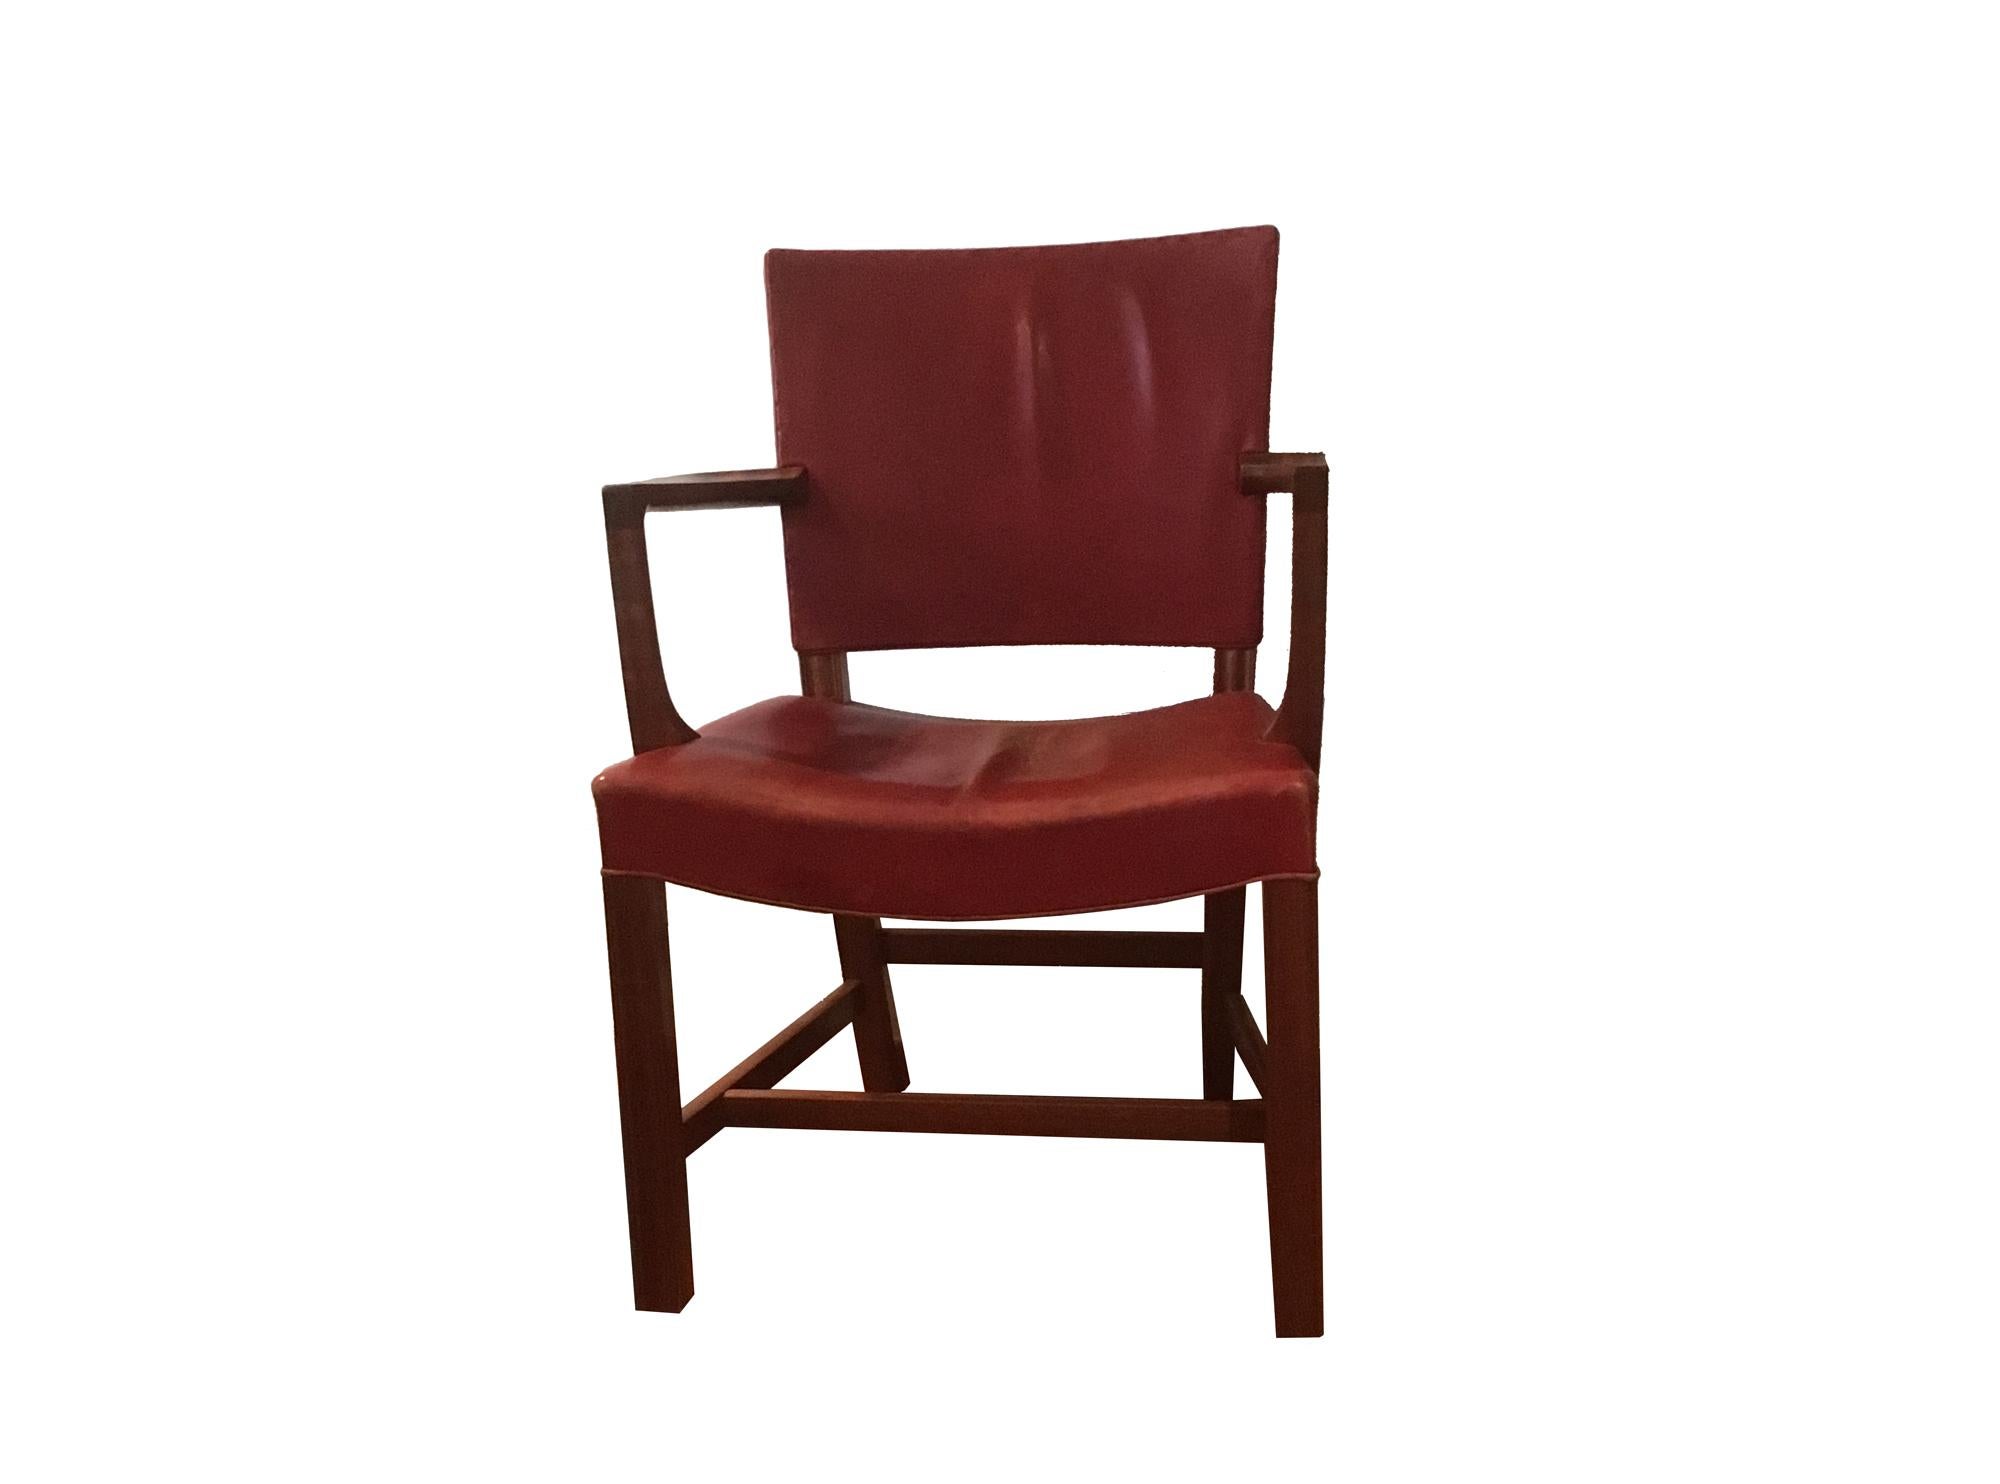 Kaare Klint Armchair in indian red leather and mahogany by Rud Rasmussens, 1940s In Good Condition For Sale In Amsterdam, NL